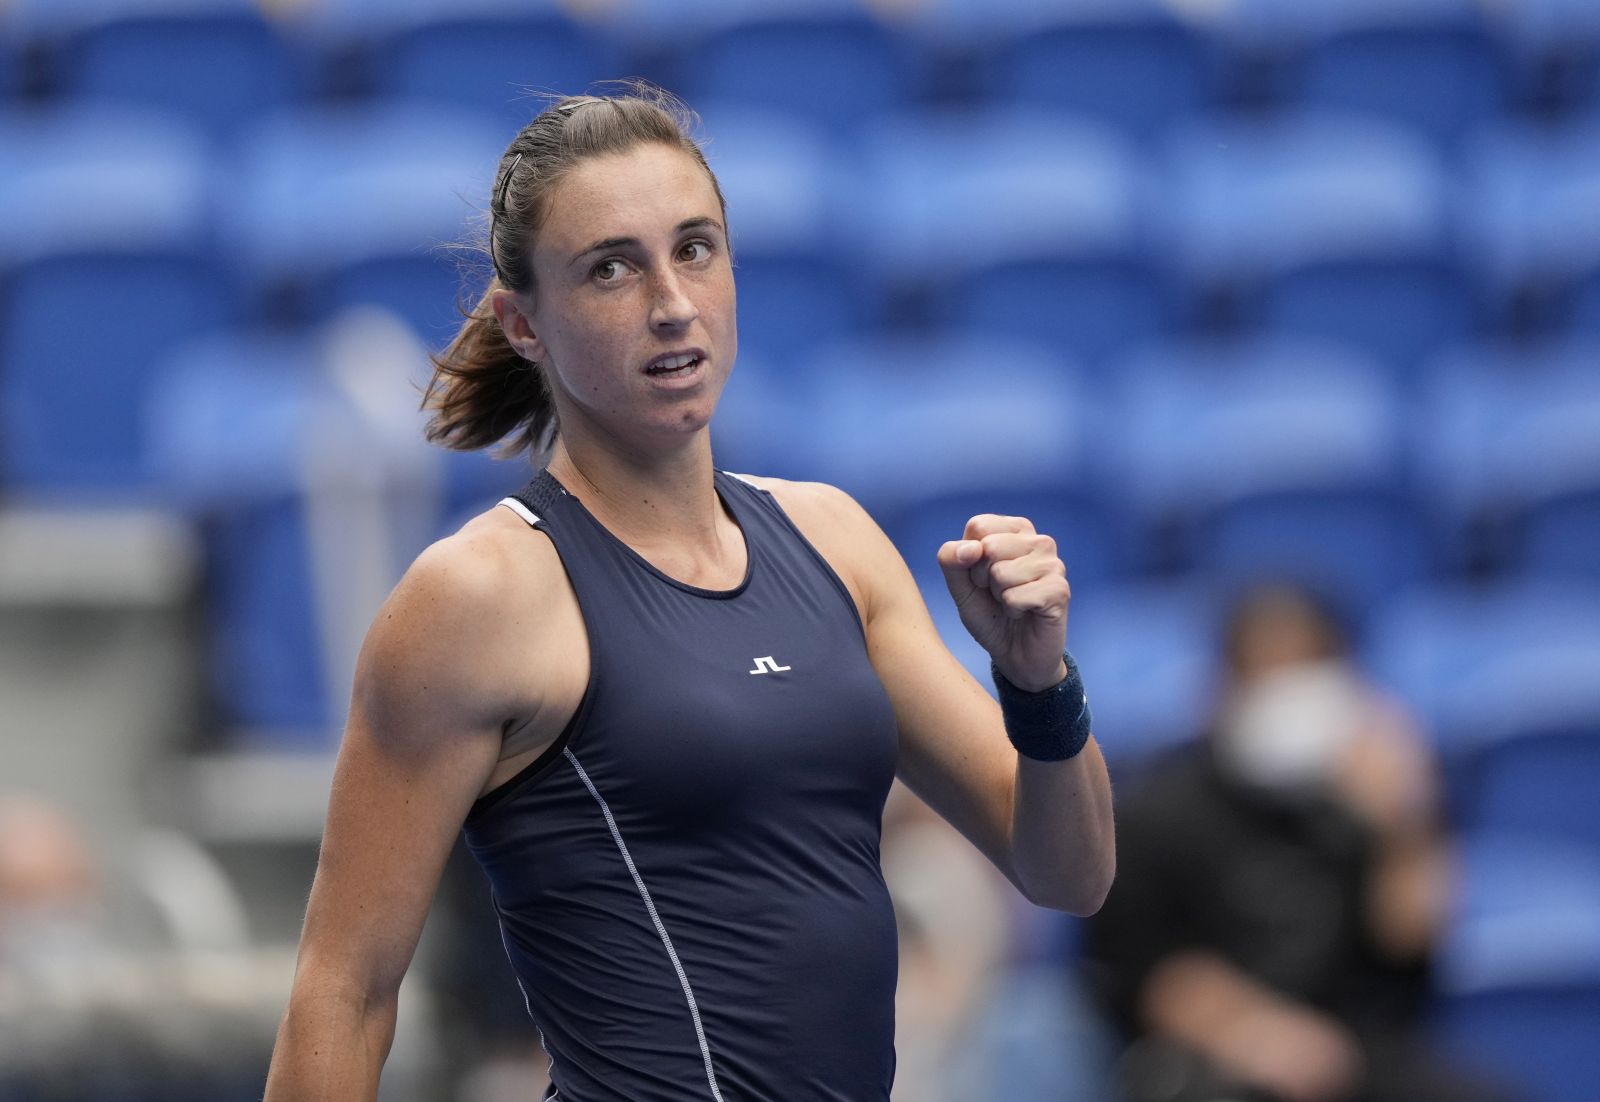 epa10198376 Petra Martic of Croatia reacts after scoring a point against Karolina Pliskova of the Czech Republic (not pictured) during their second round match at the Pan Pacific Open tennis tournament in Tokyo, Japan, 22 September 2022.  EPA/FRANCK ROBICHON